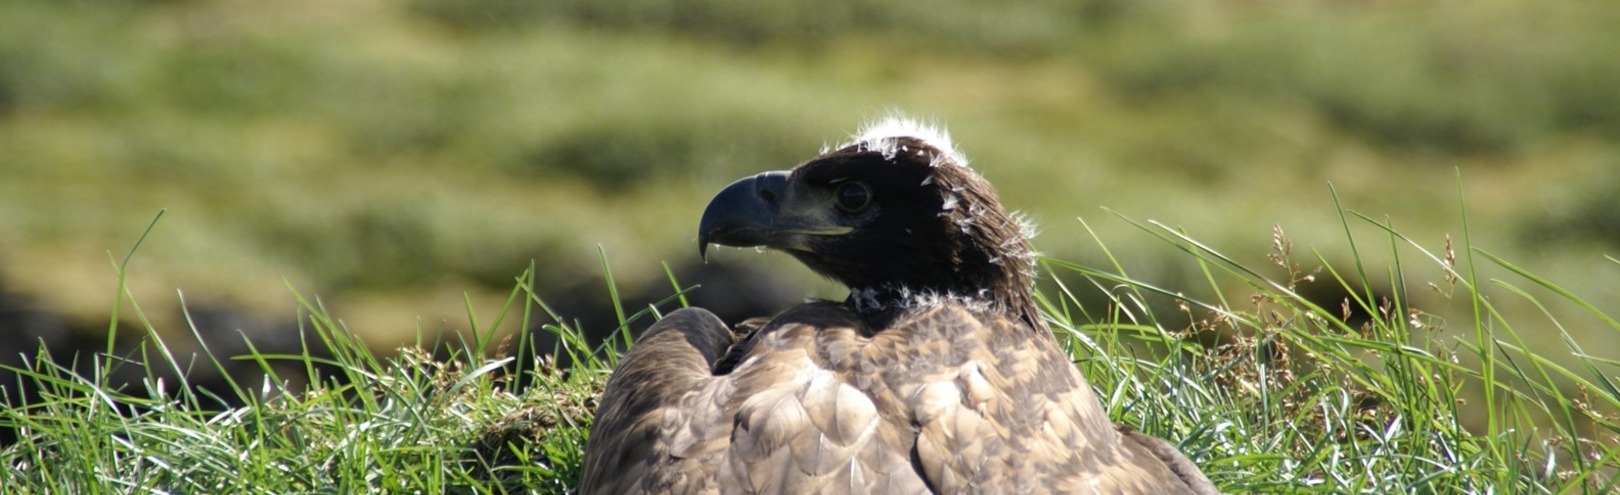 How does inbreeding affect white-tailed eagles? - Available at University of Iceland